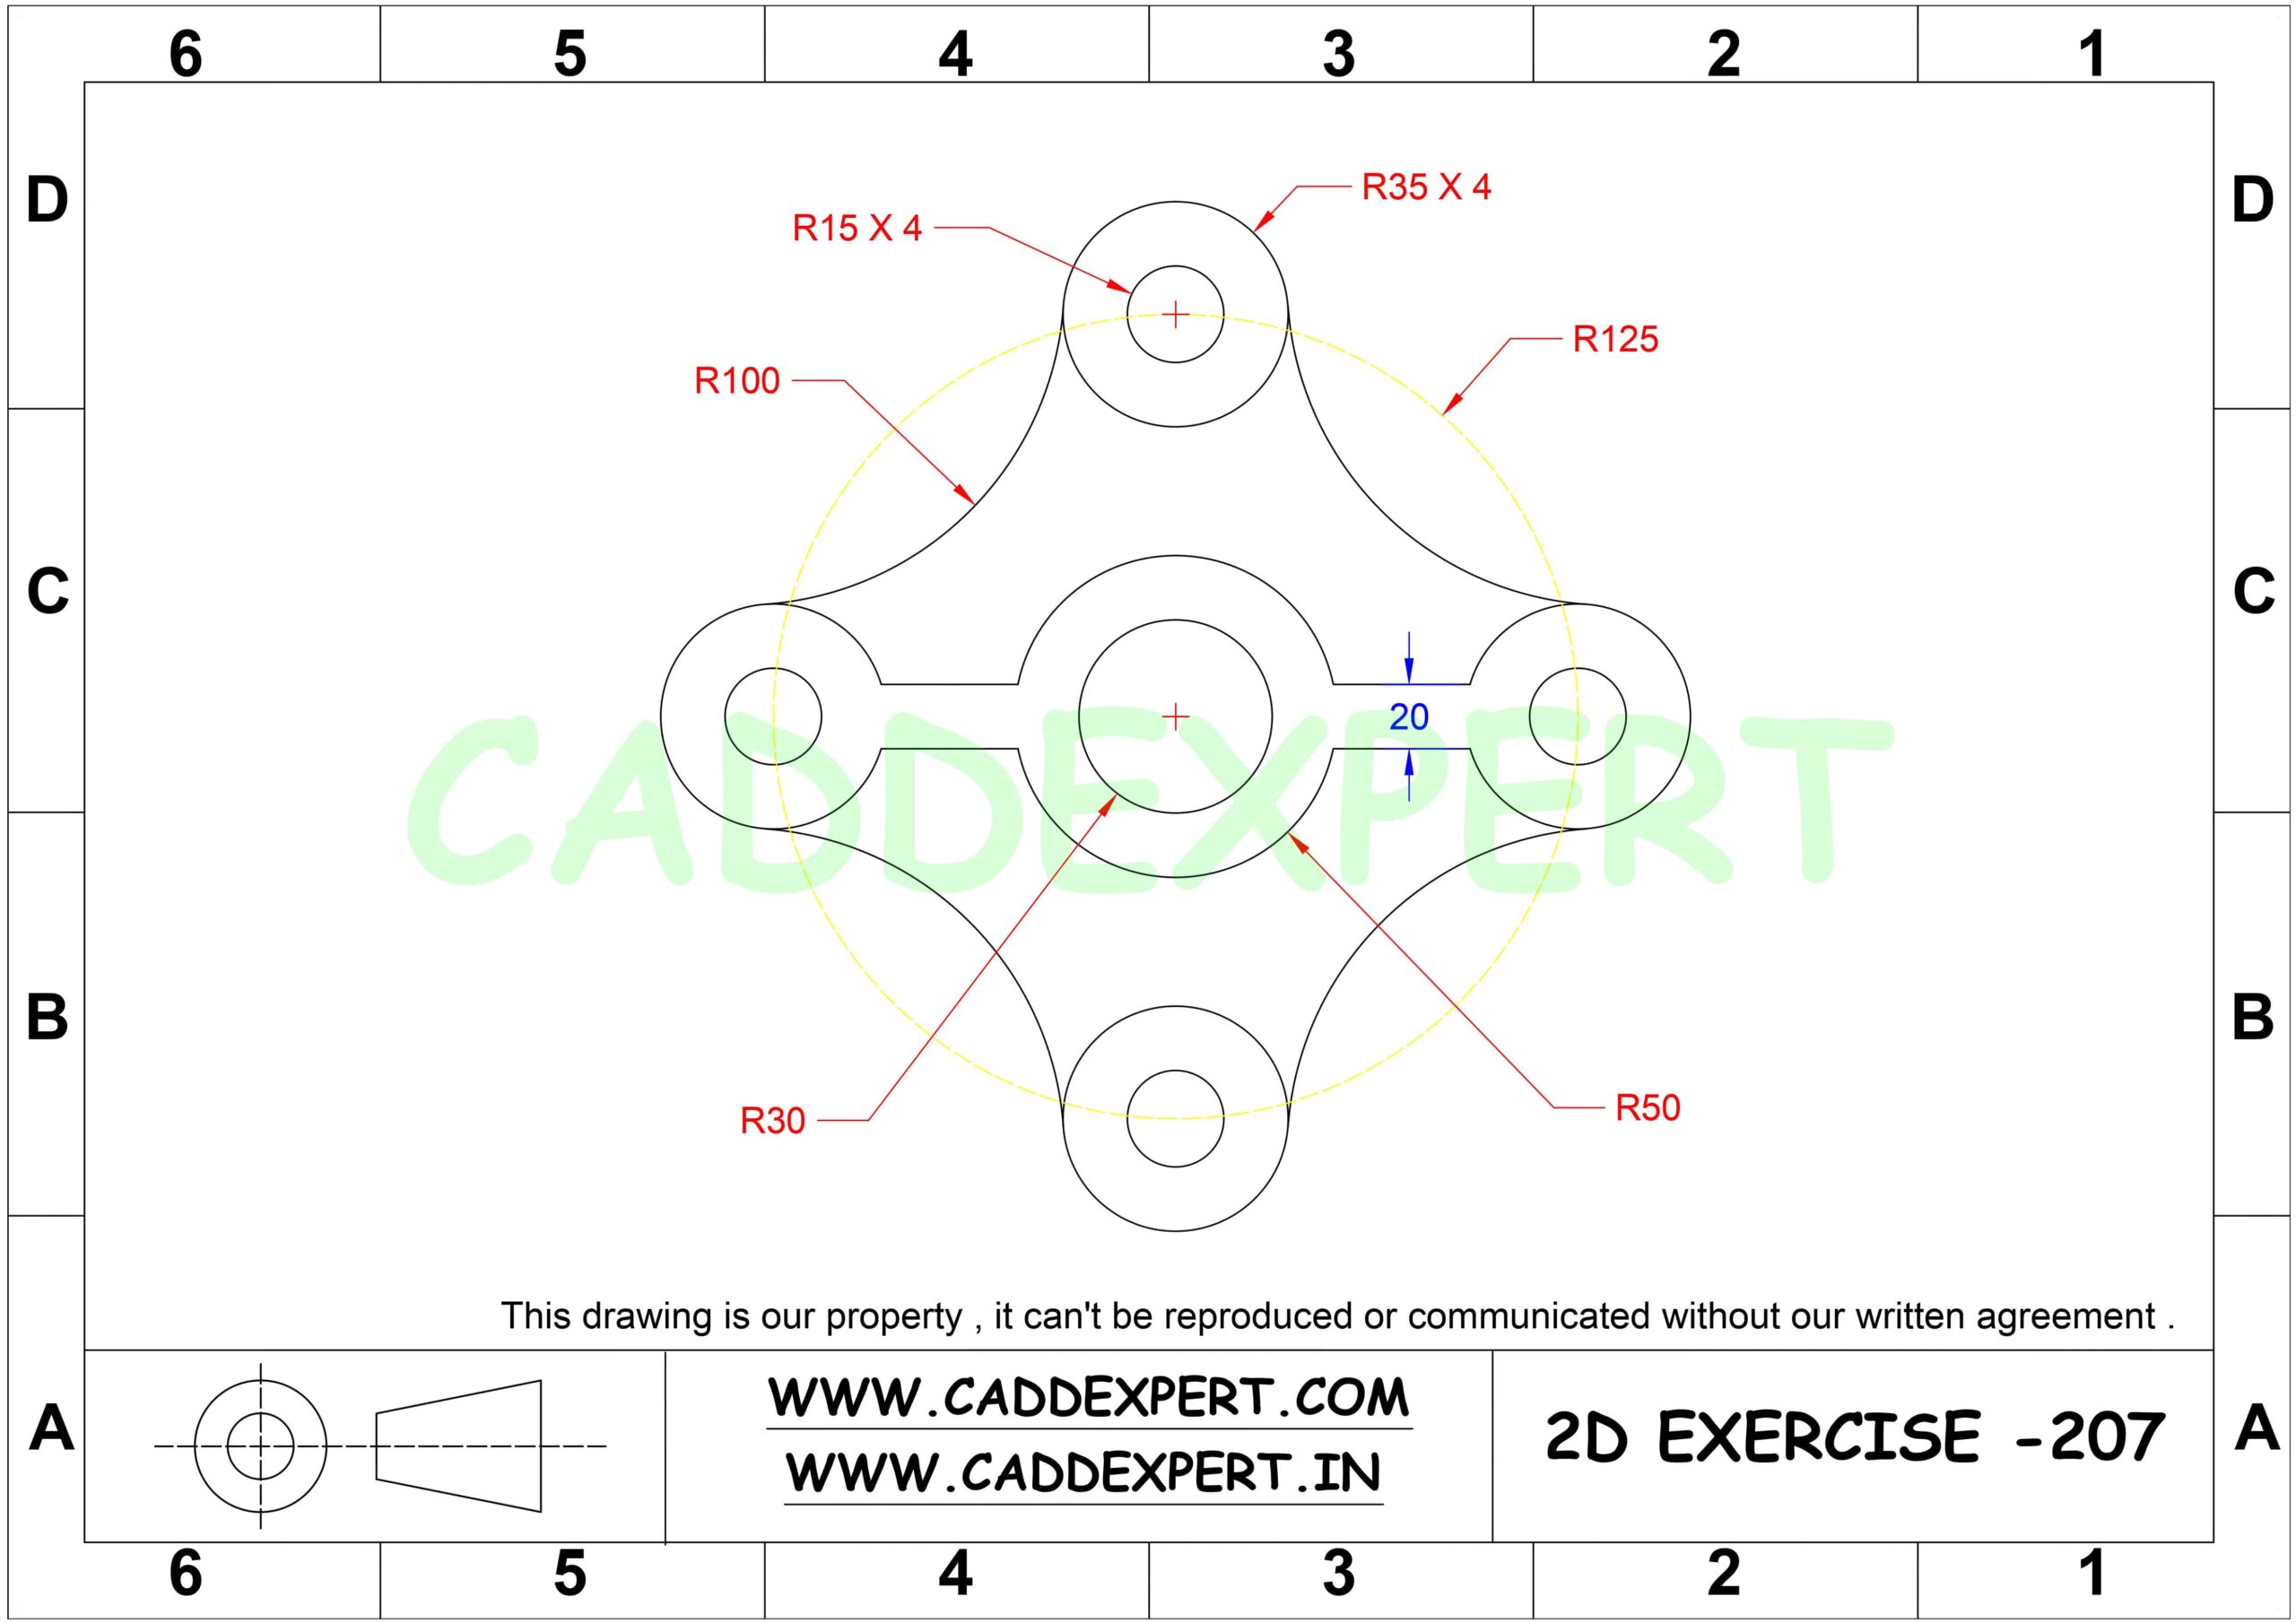 50 AUTOCAD PRACTICE DRAWING - 7